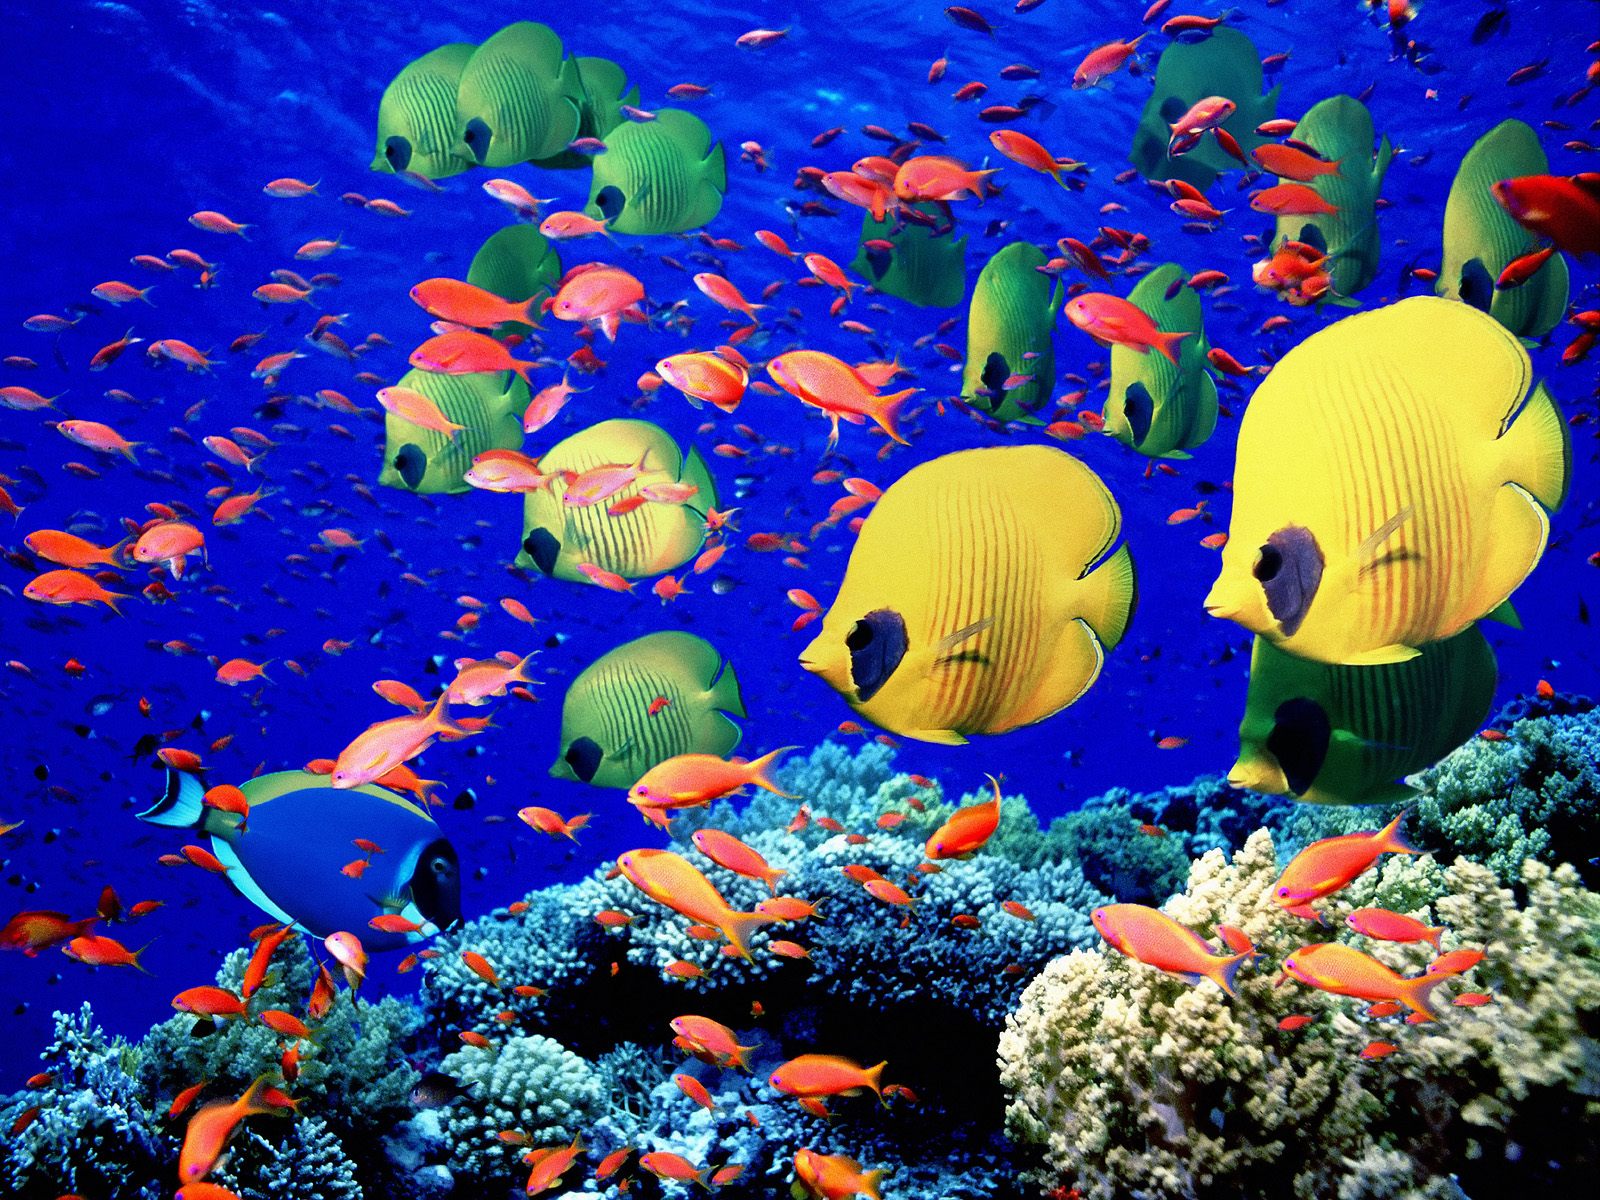 Coral butterflyfish swimming among vibrant underwater flora.